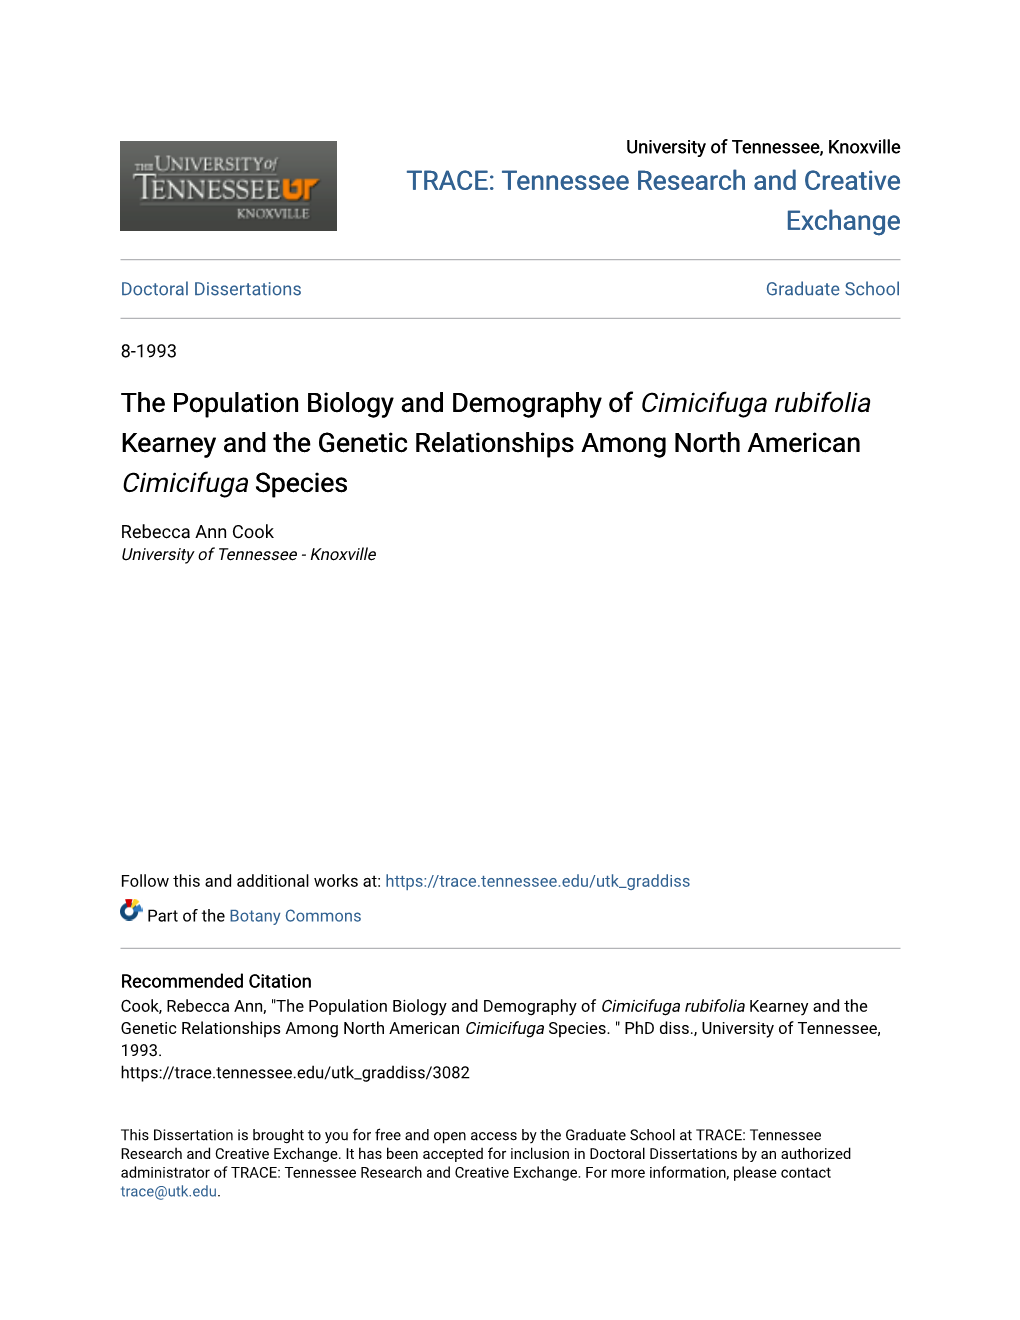 The Population Biology and Demography of Cimicifuga Rubifolia Kearney and the Genetic Relationships Among North American Cimicifuga Species